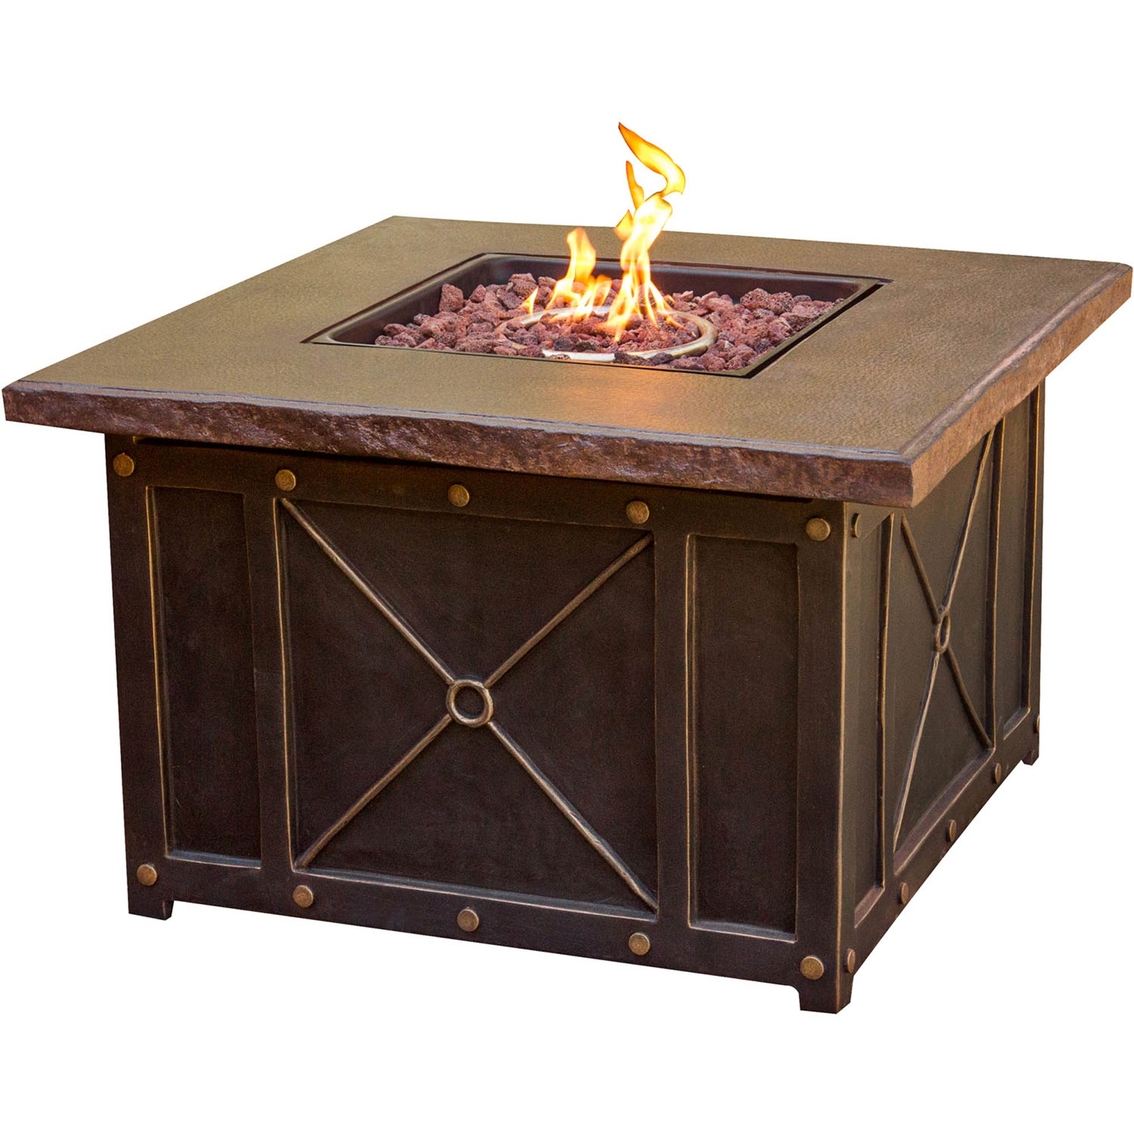 Hanover Traditions 2 pc. Outdoor Lounge Set with Durastone Fire Pit - Image 2 of 4